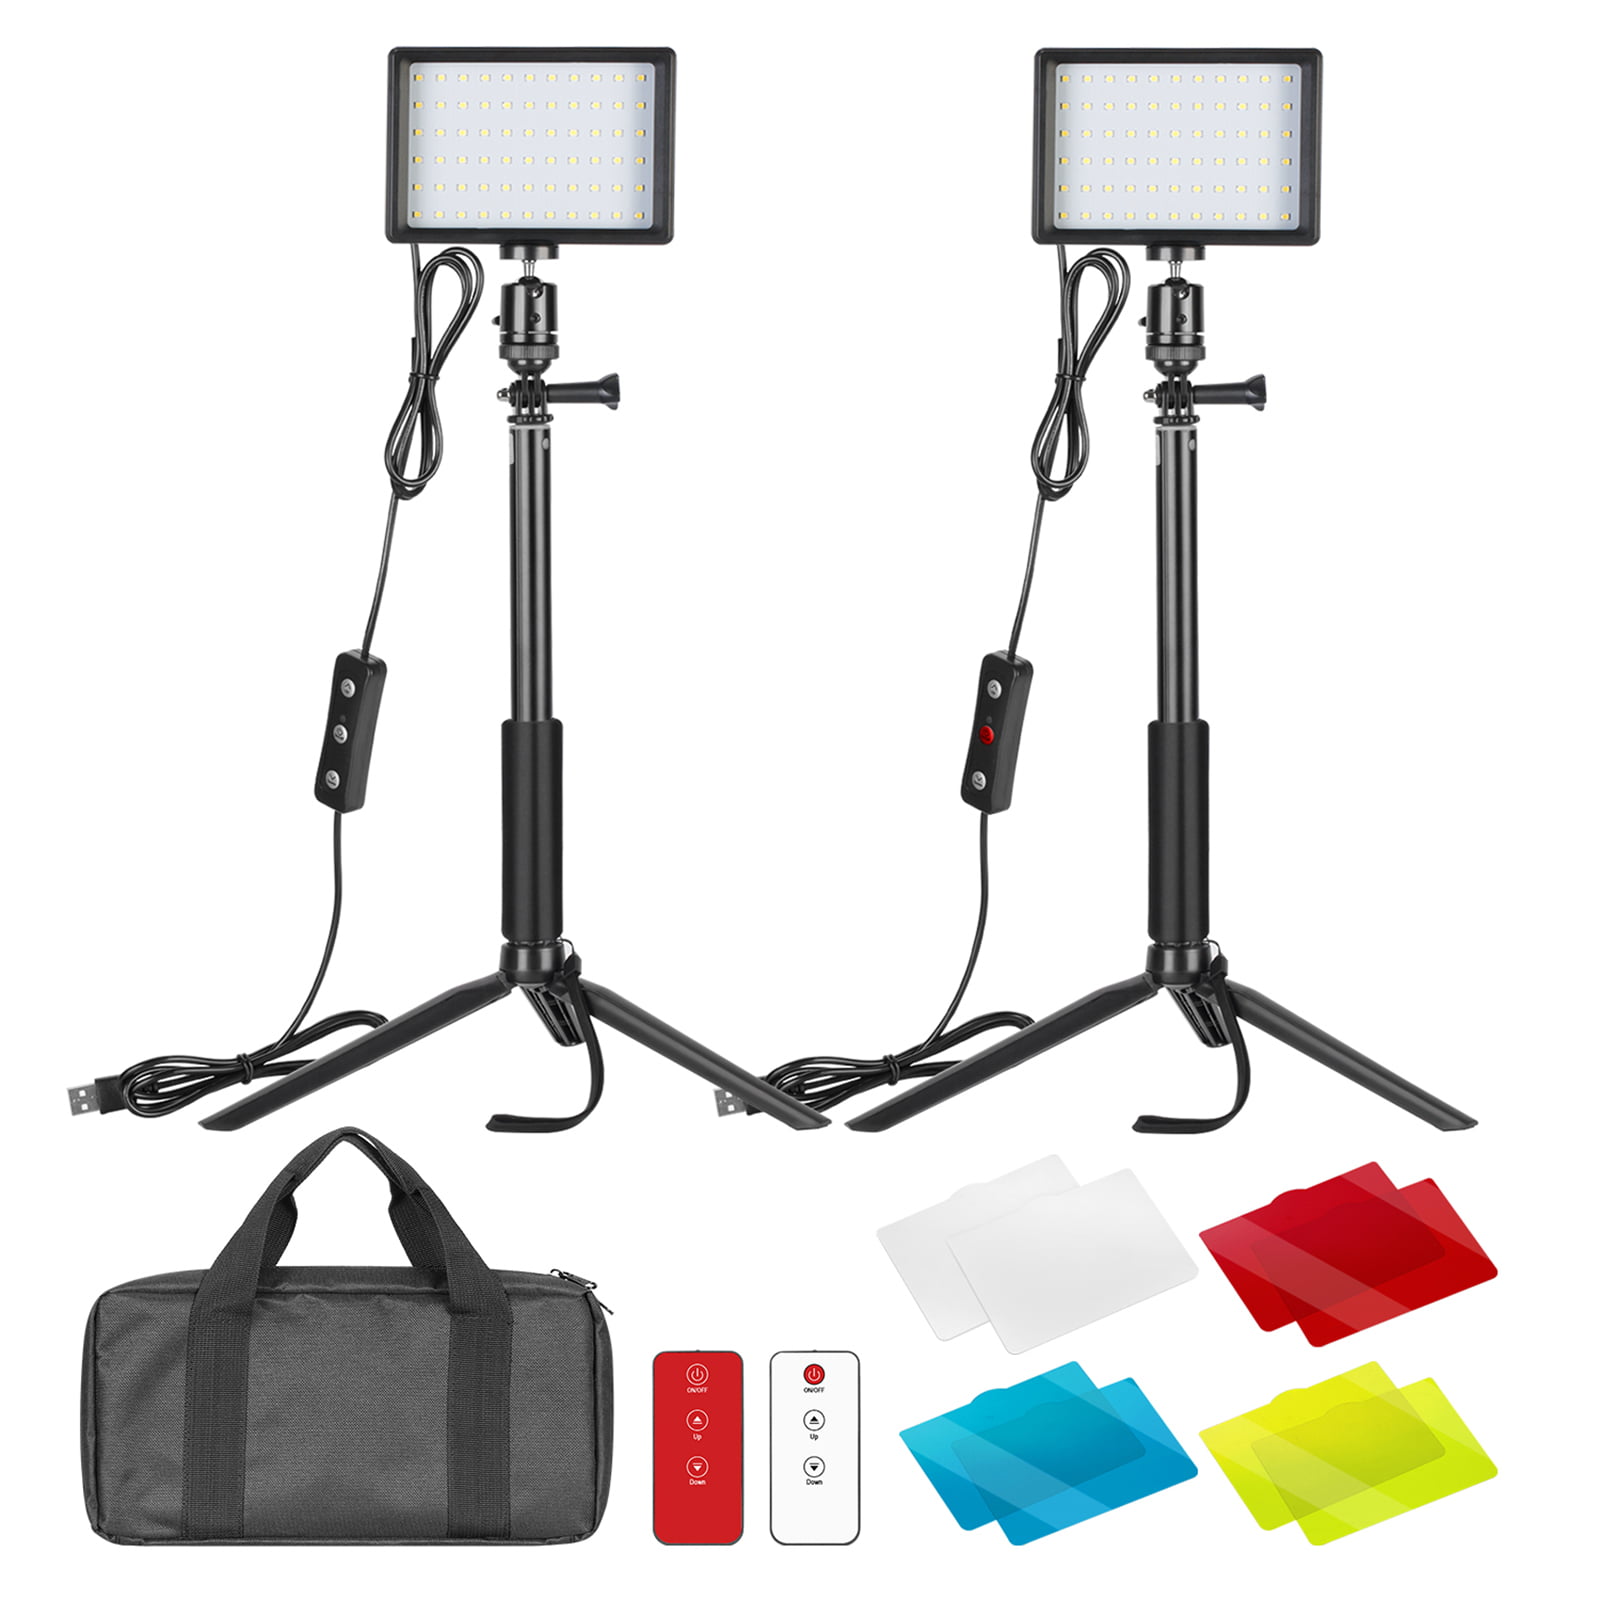 Neewer 2-Pack Conference Lighting Kit with Remote Control for Zoom Call Meeting/Remote Working/Self Broadcast/Live Streaming 3200K-5600K Dimmable LED Video Light with Scissor Arm Stand/Color Filters